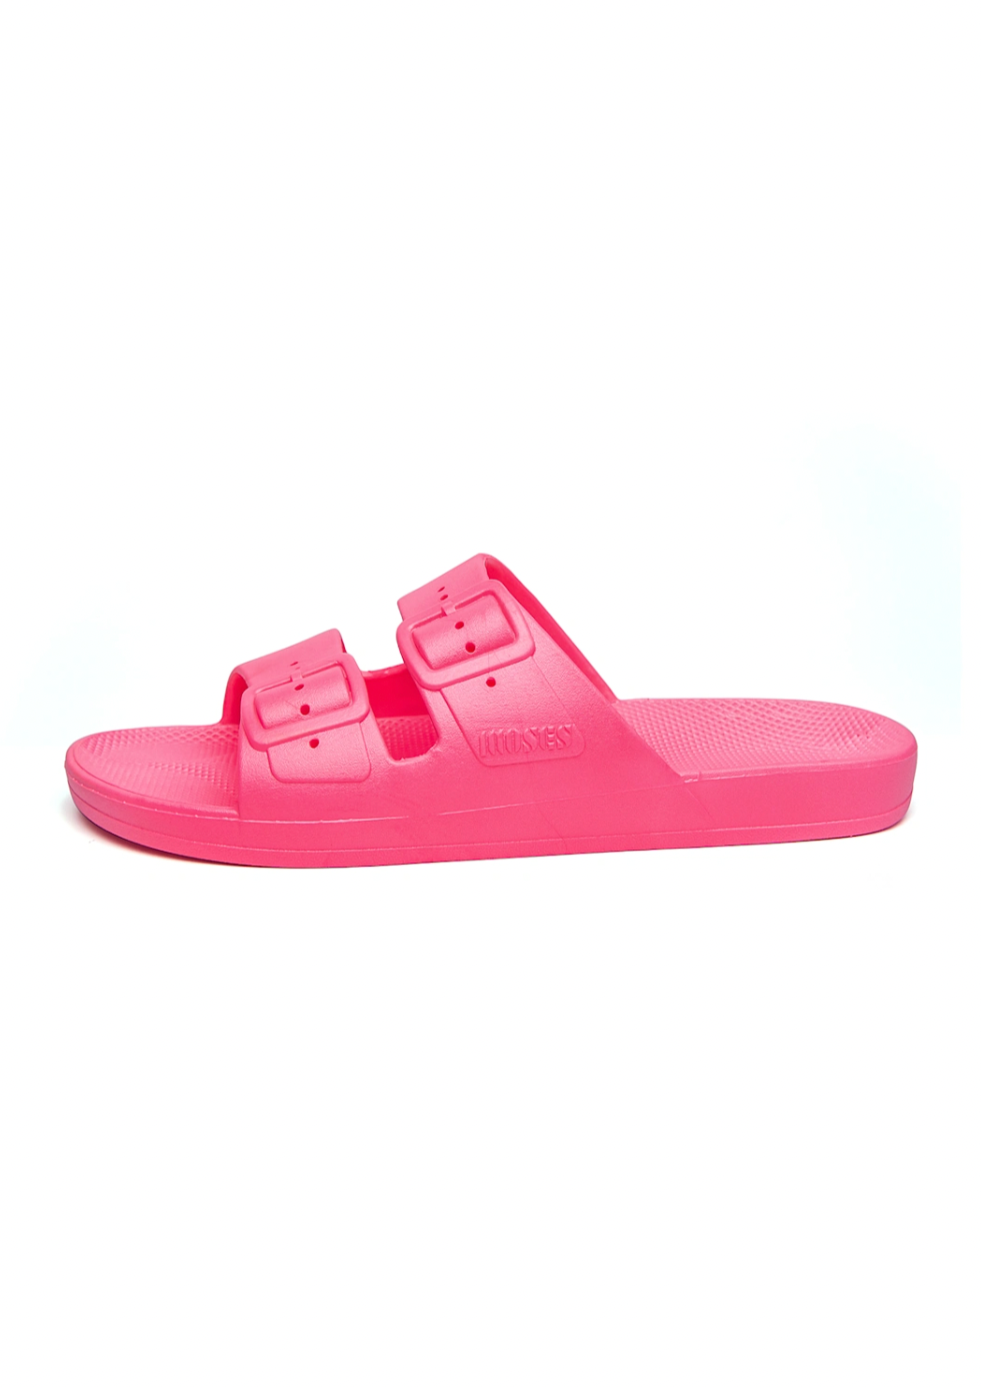 Freedom Moses 'Glow' - Pink Neon Slides (Kids + Adults Sizes)